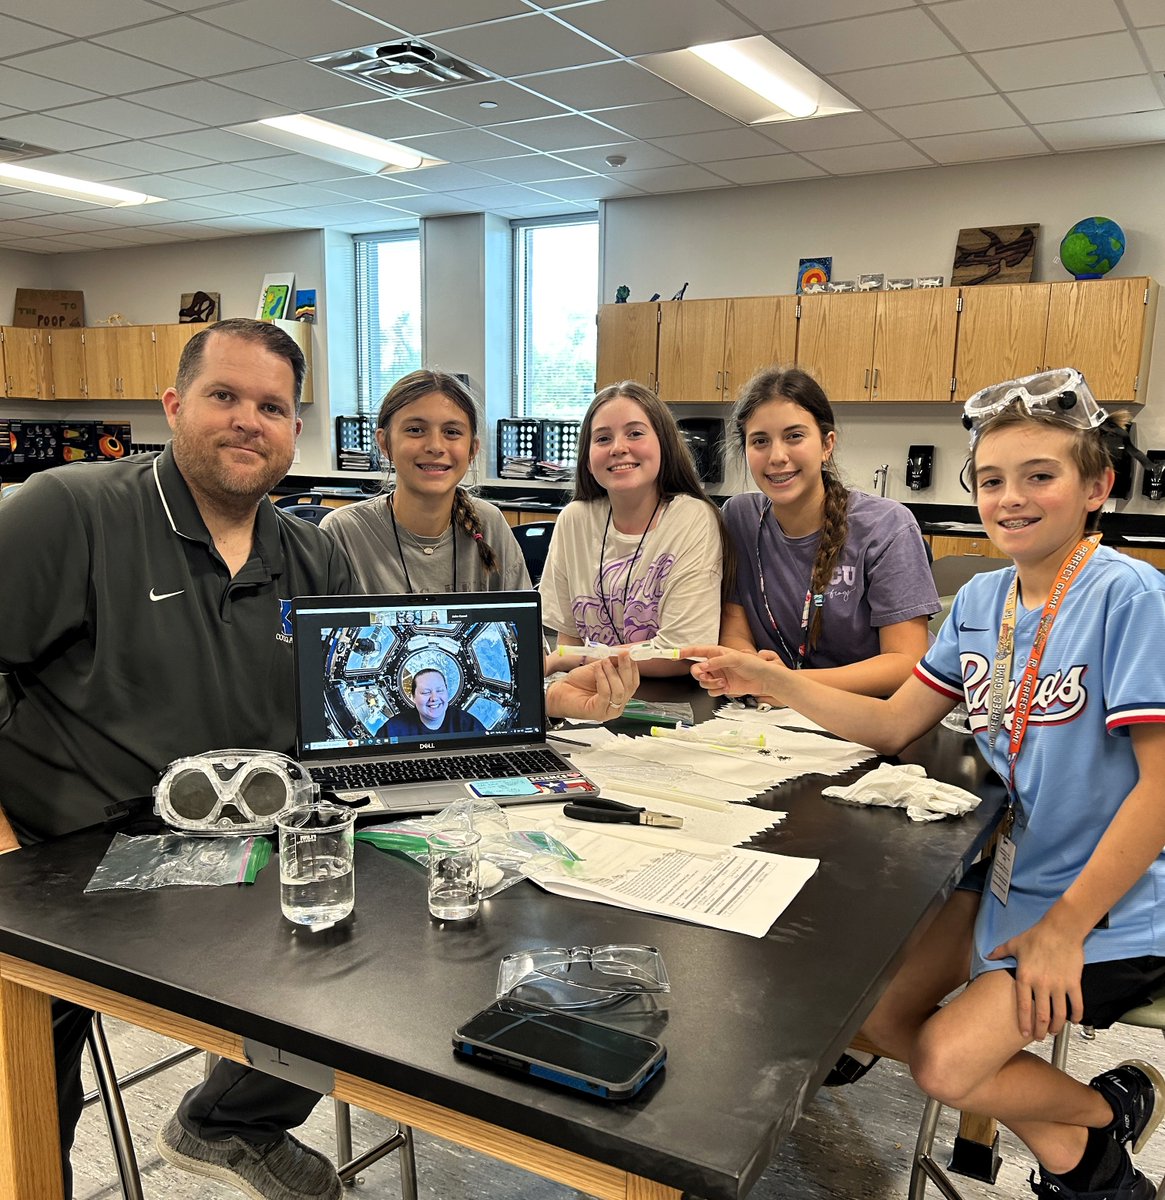 KMS' Student Spaceflight Experiments Program Mission 17 team's experiment is ready for launch!

🚀 Students loaded their experiment with the help of Nanoracks scientist Julia Wolfenbarger for launch to the International Space Station on Nov. 5th at 10:02 pm EST. 

👇 👇👇